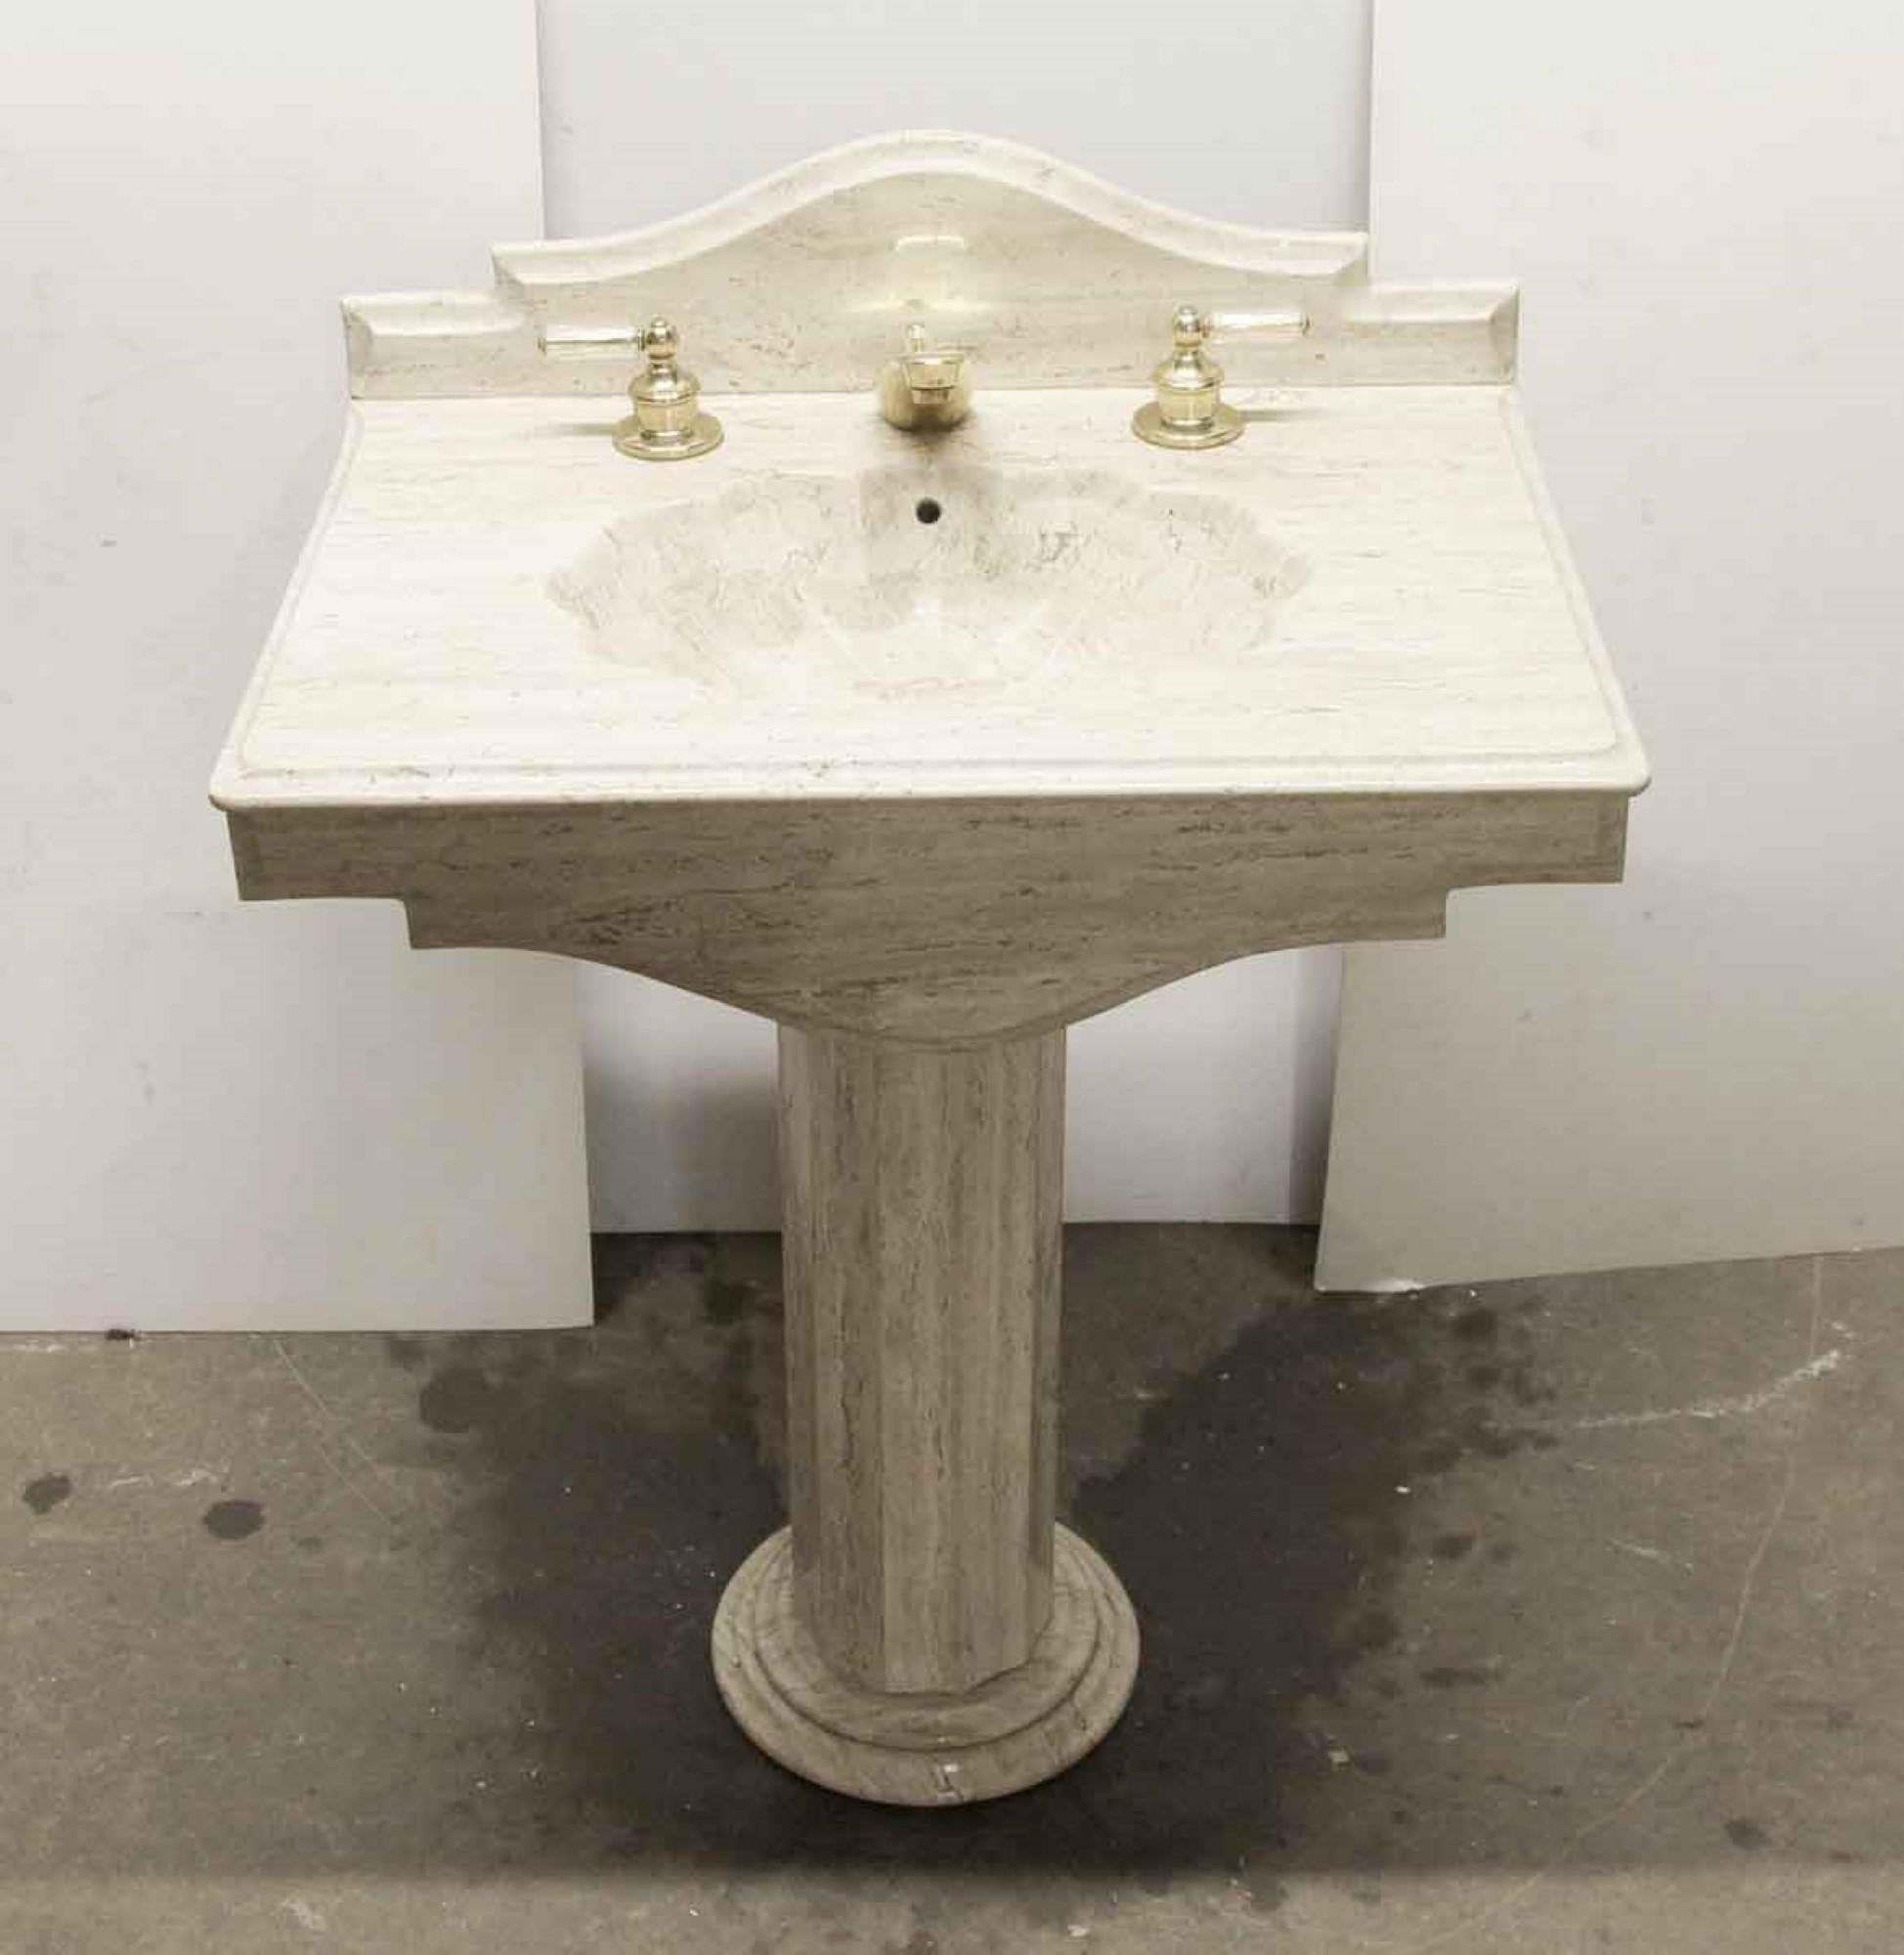 This is a multi-toned tan carved sink basin from the 1990s. The basin is designed with a seashell shape, with a further seashell design inside the bowl itself. The hardware is original, a clear plastic design covers the brass handles and top of